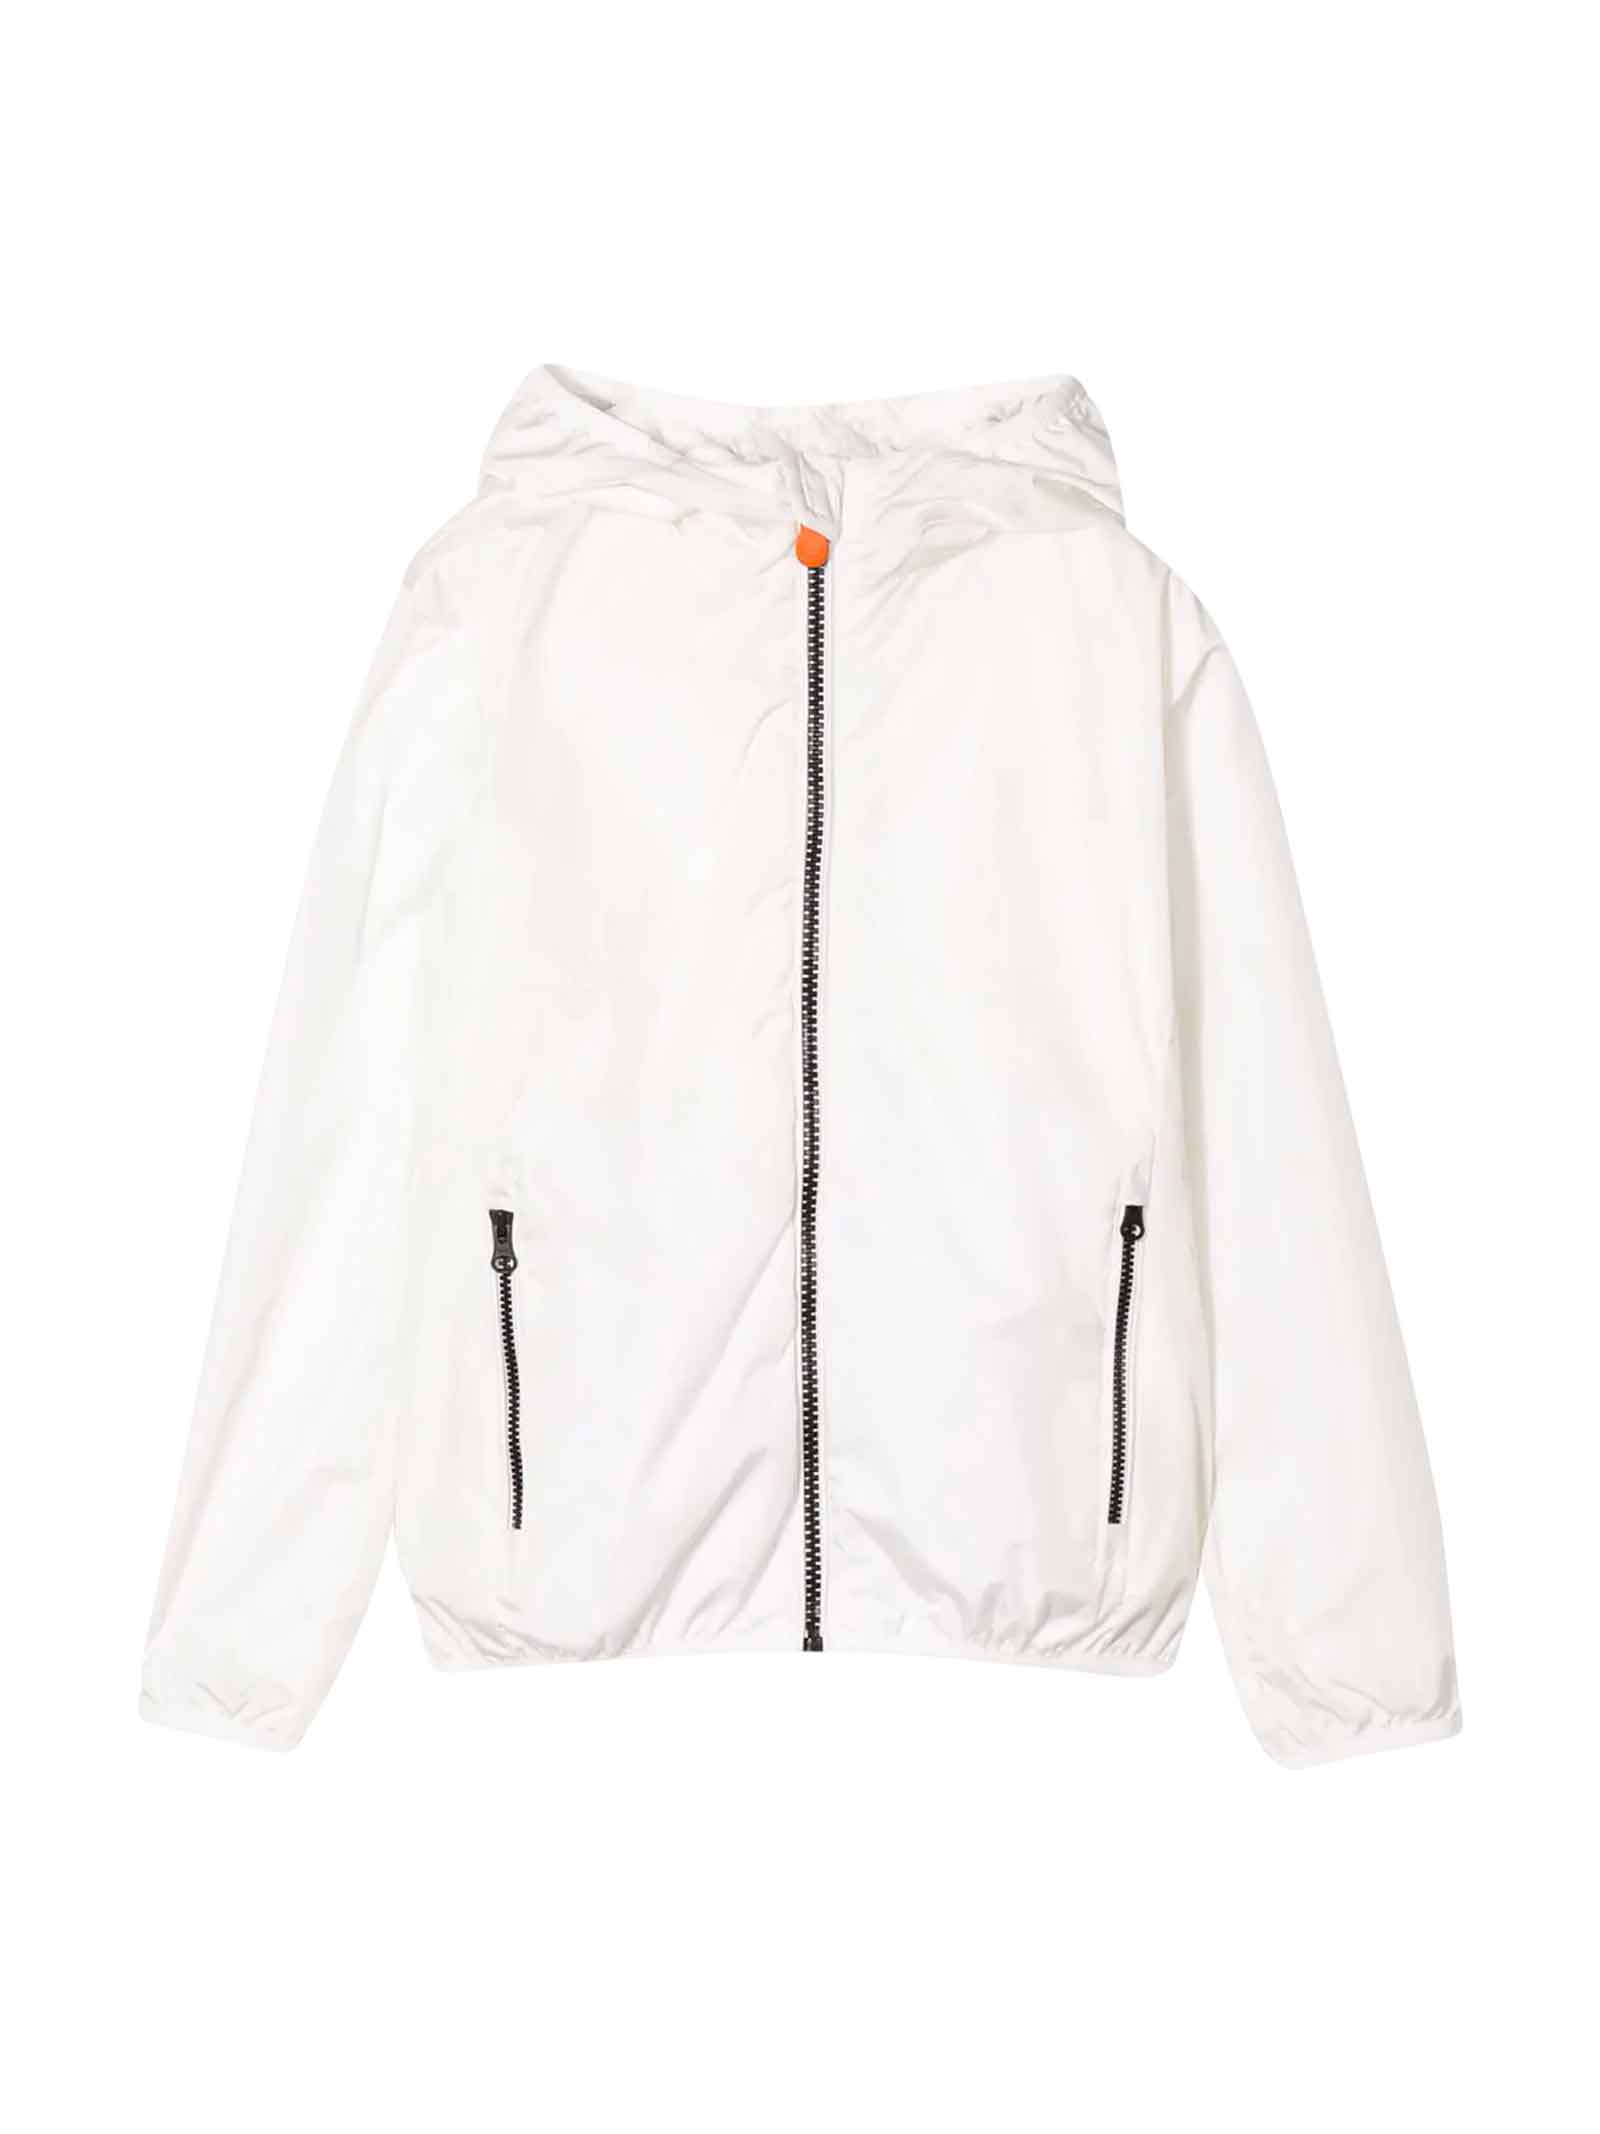 SAVE THE DUCK WHITE WATERPROOF JACKET WITH HOOD,11305364